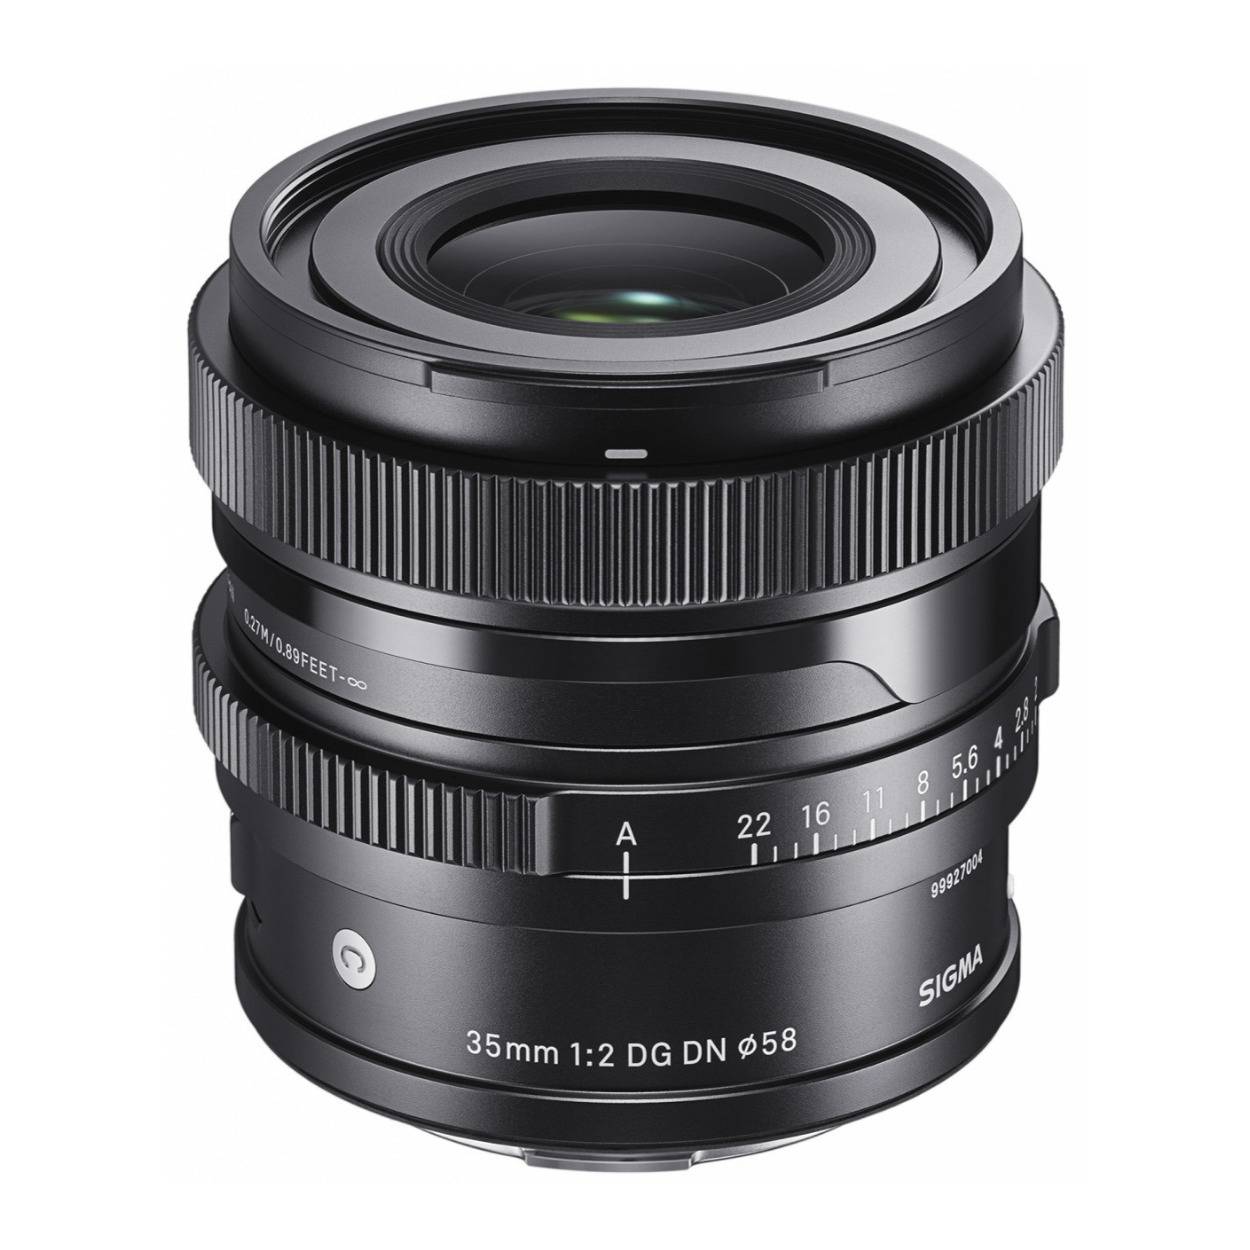 Sigma I Series 35mm f/2 DG DN Contemporary Lens for L Mount